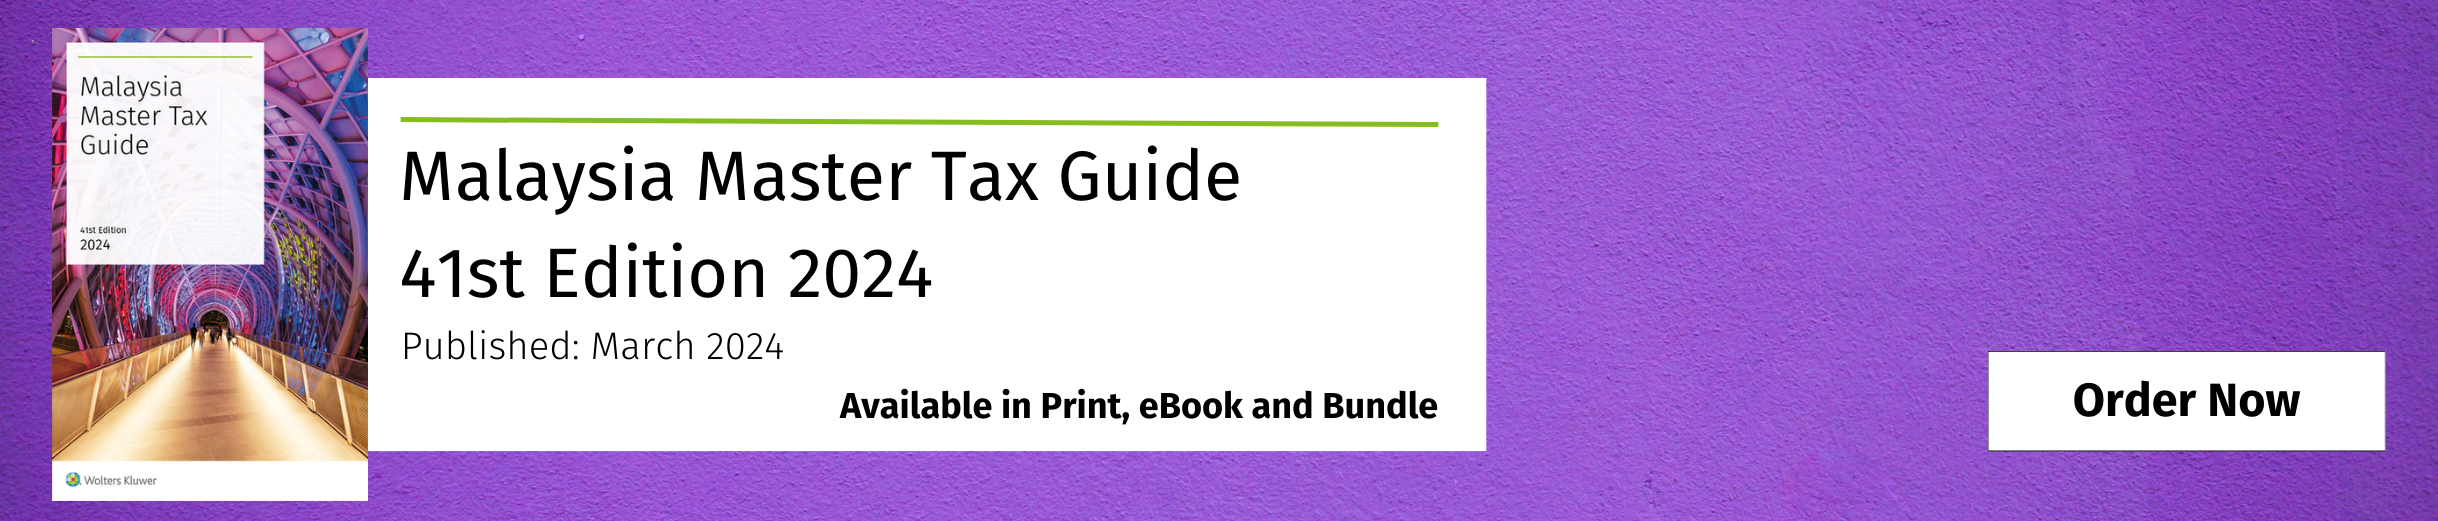 Malaysia Master Tax Guide 41st Edition 2024